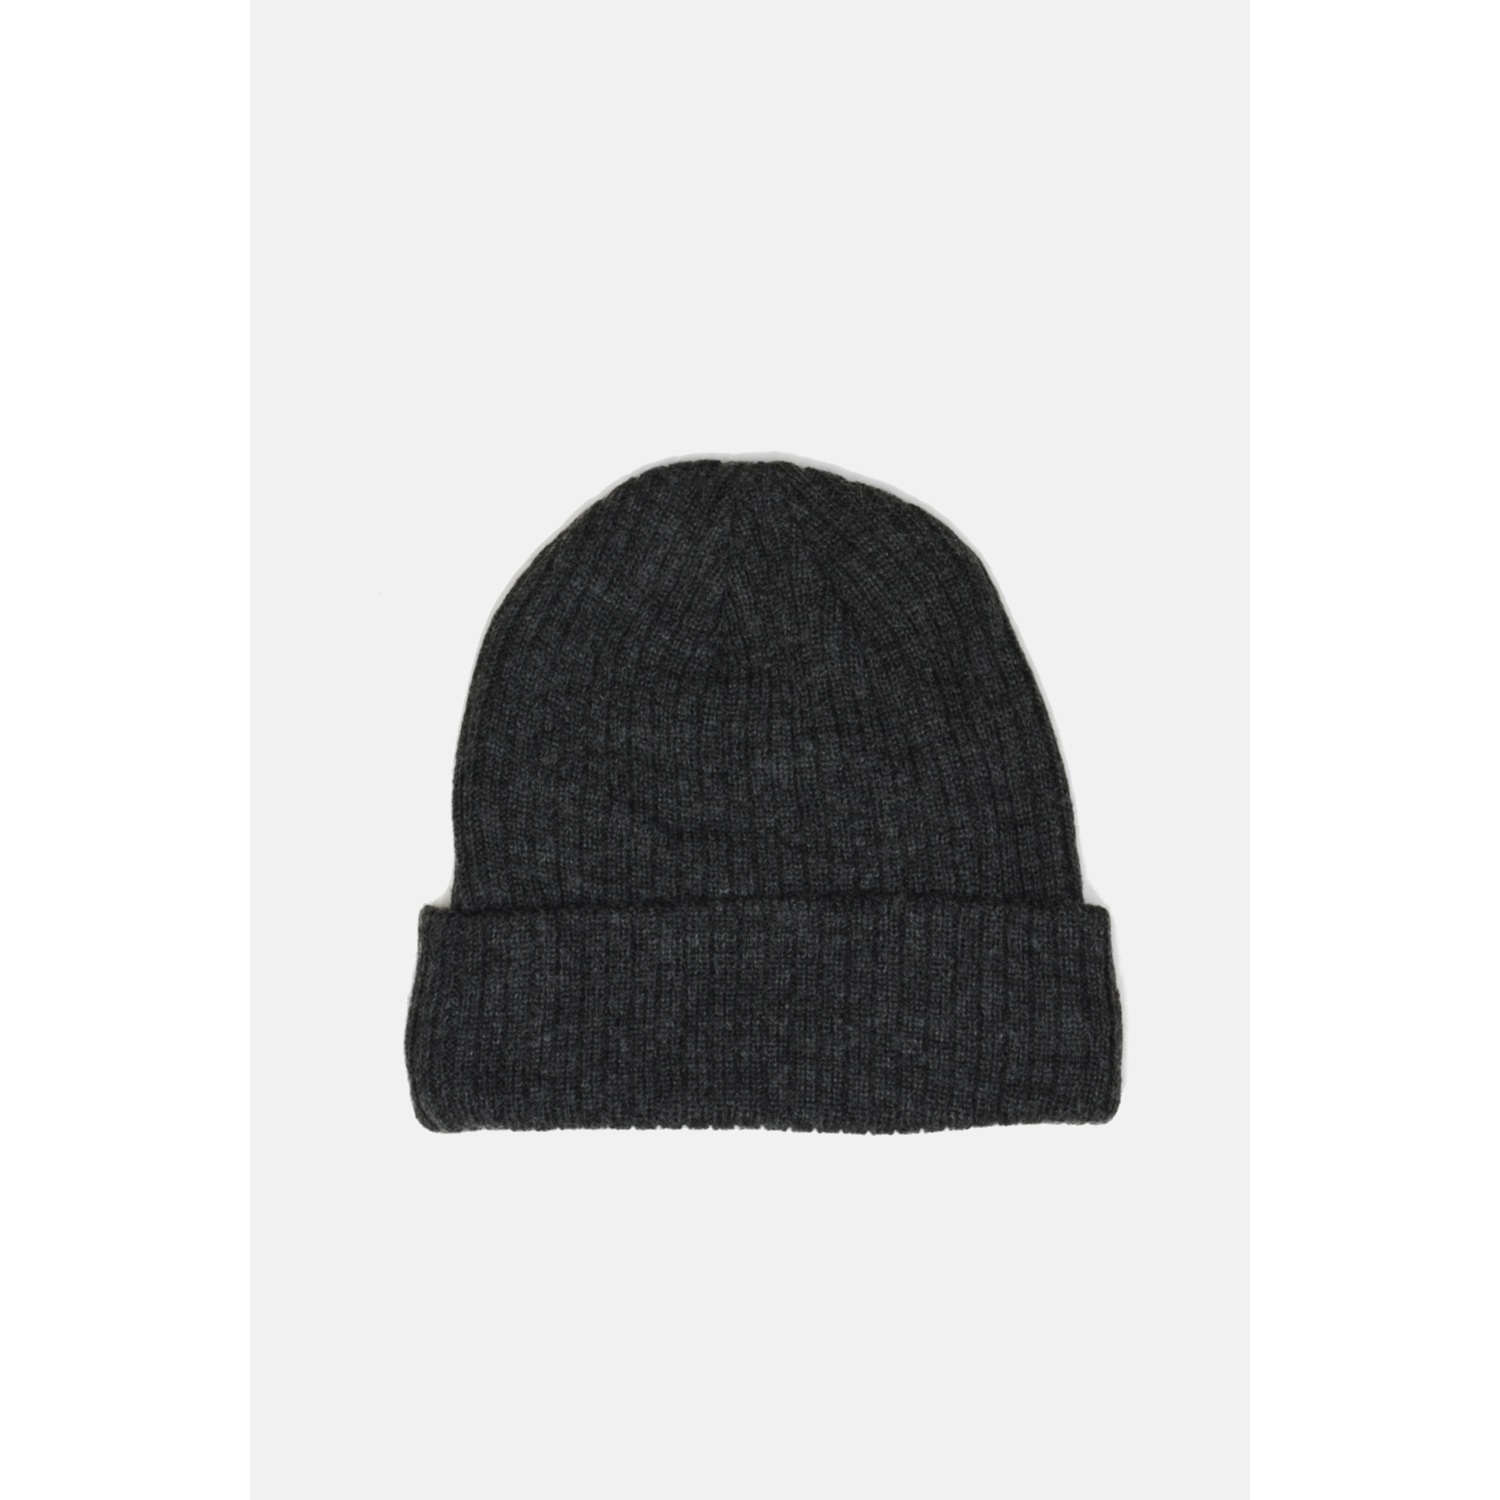 Fleeced Lined 100% Wool Beanie Charcoal - escape